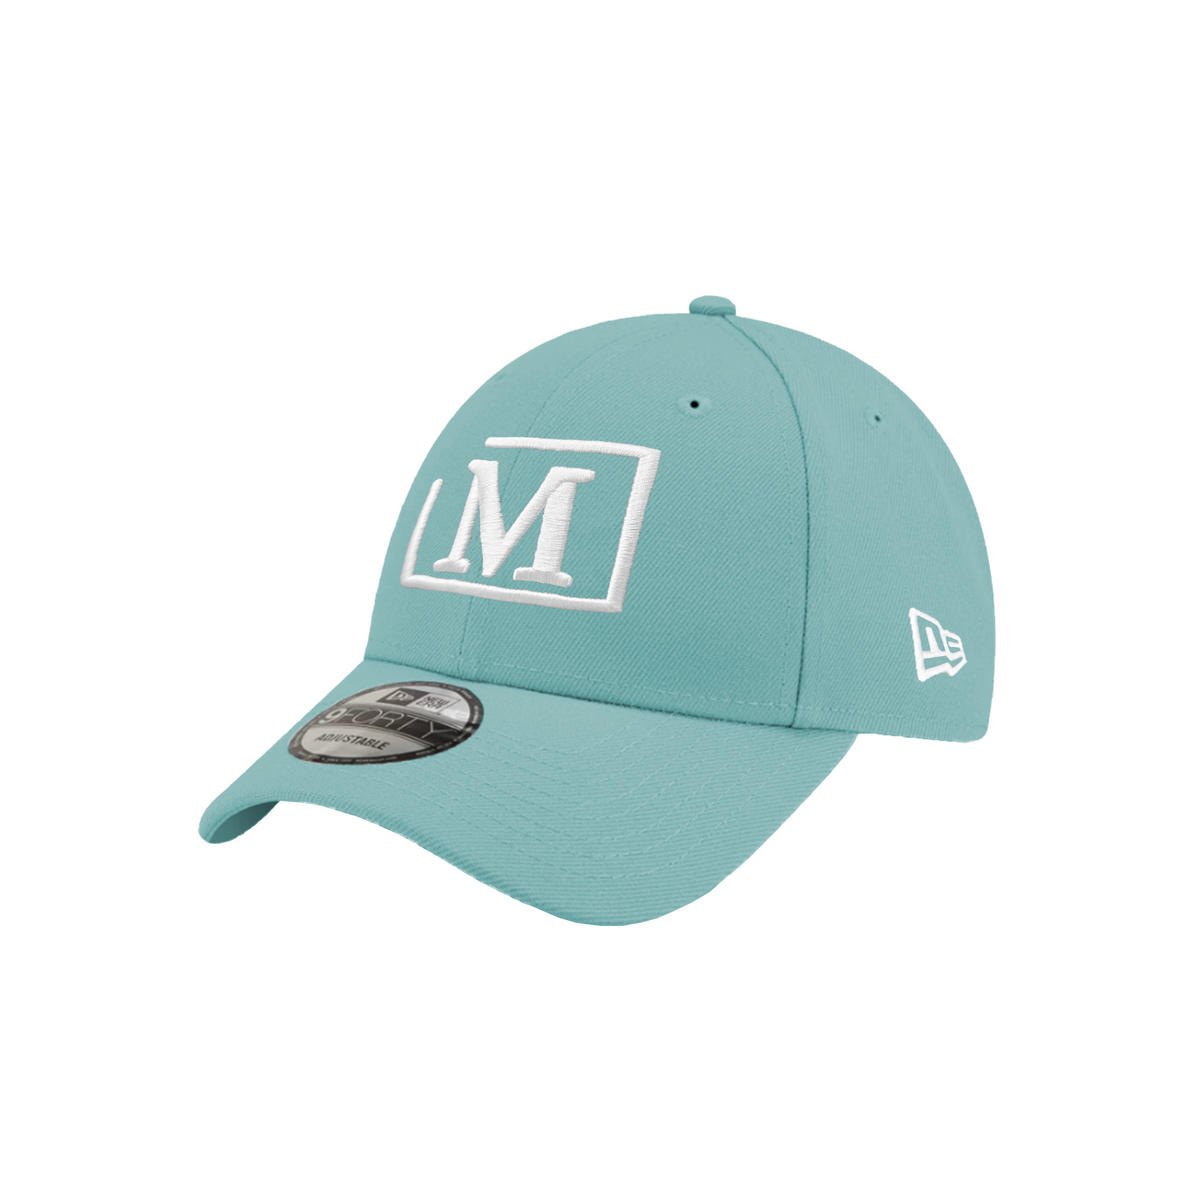 MDB Brand x New Era 9Forty Stretch Snap Embroidered Cap - Soft Colors